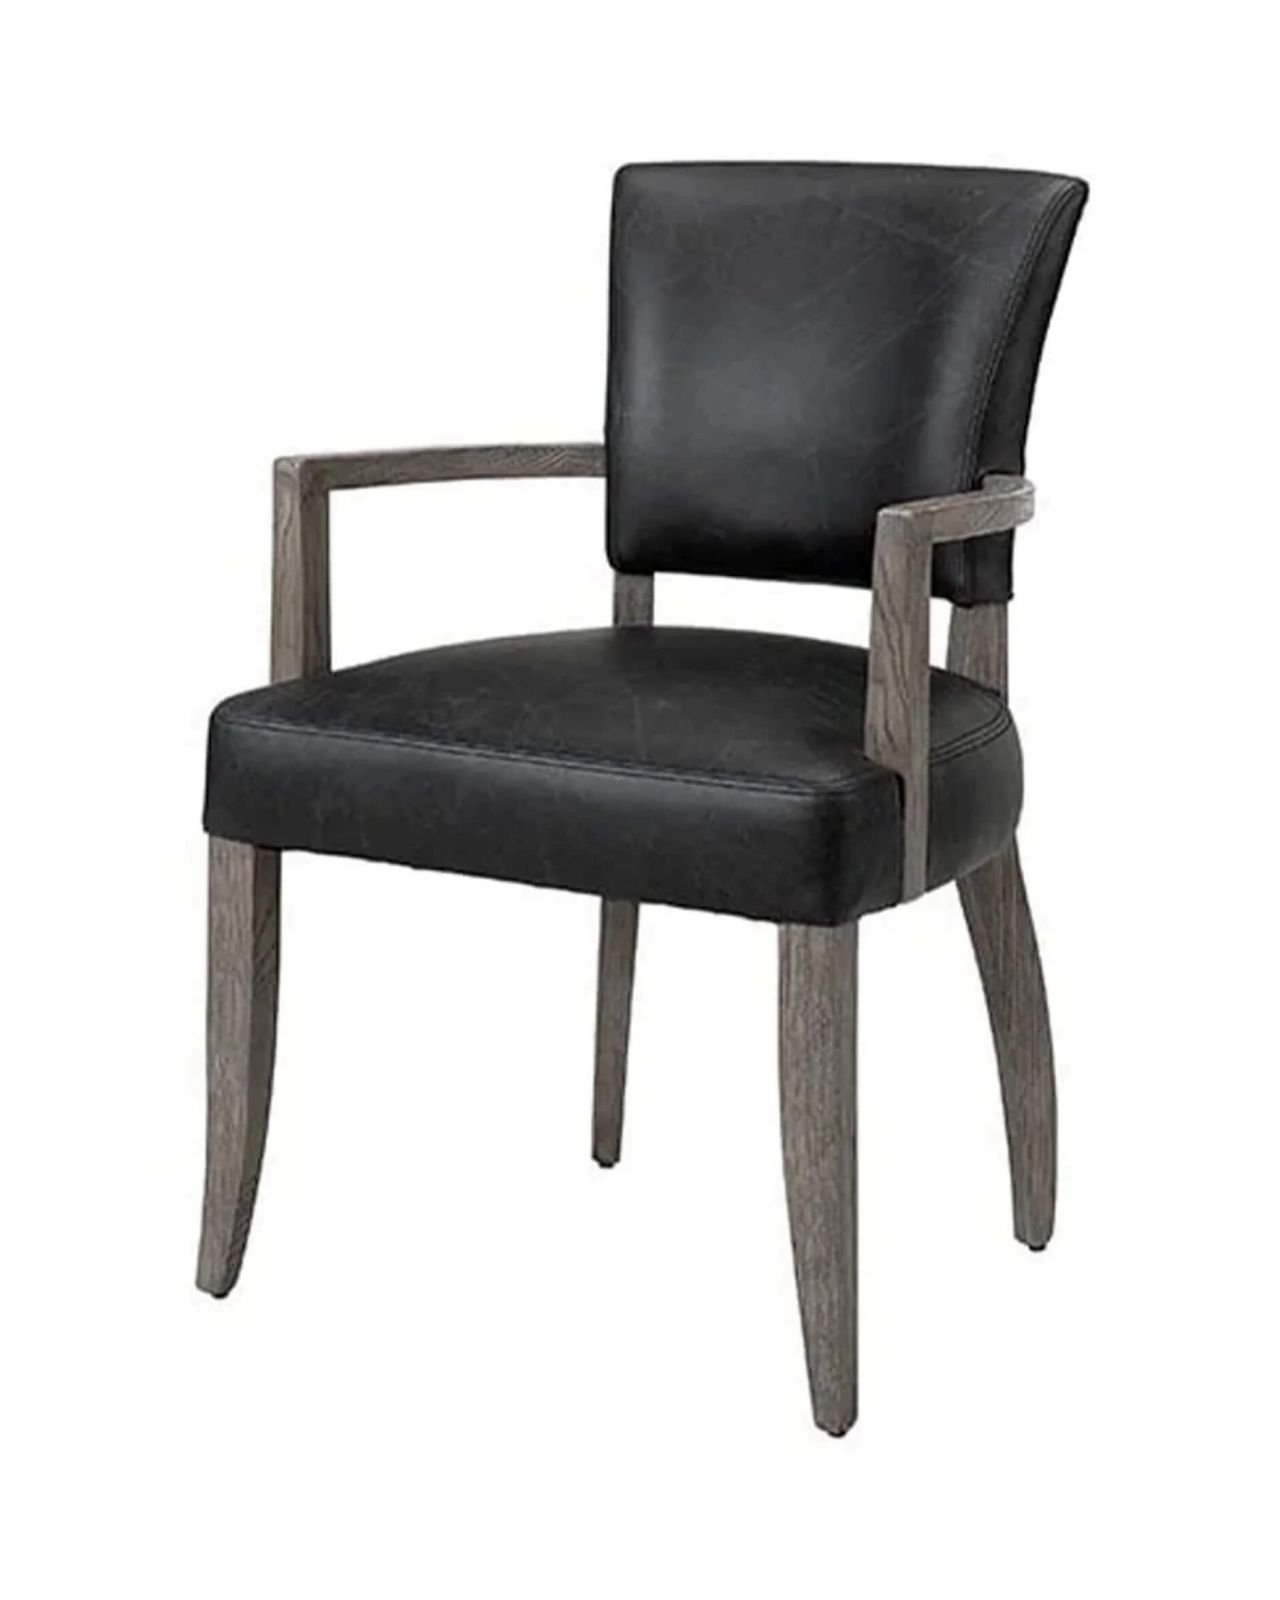 Maggie armchair leather black